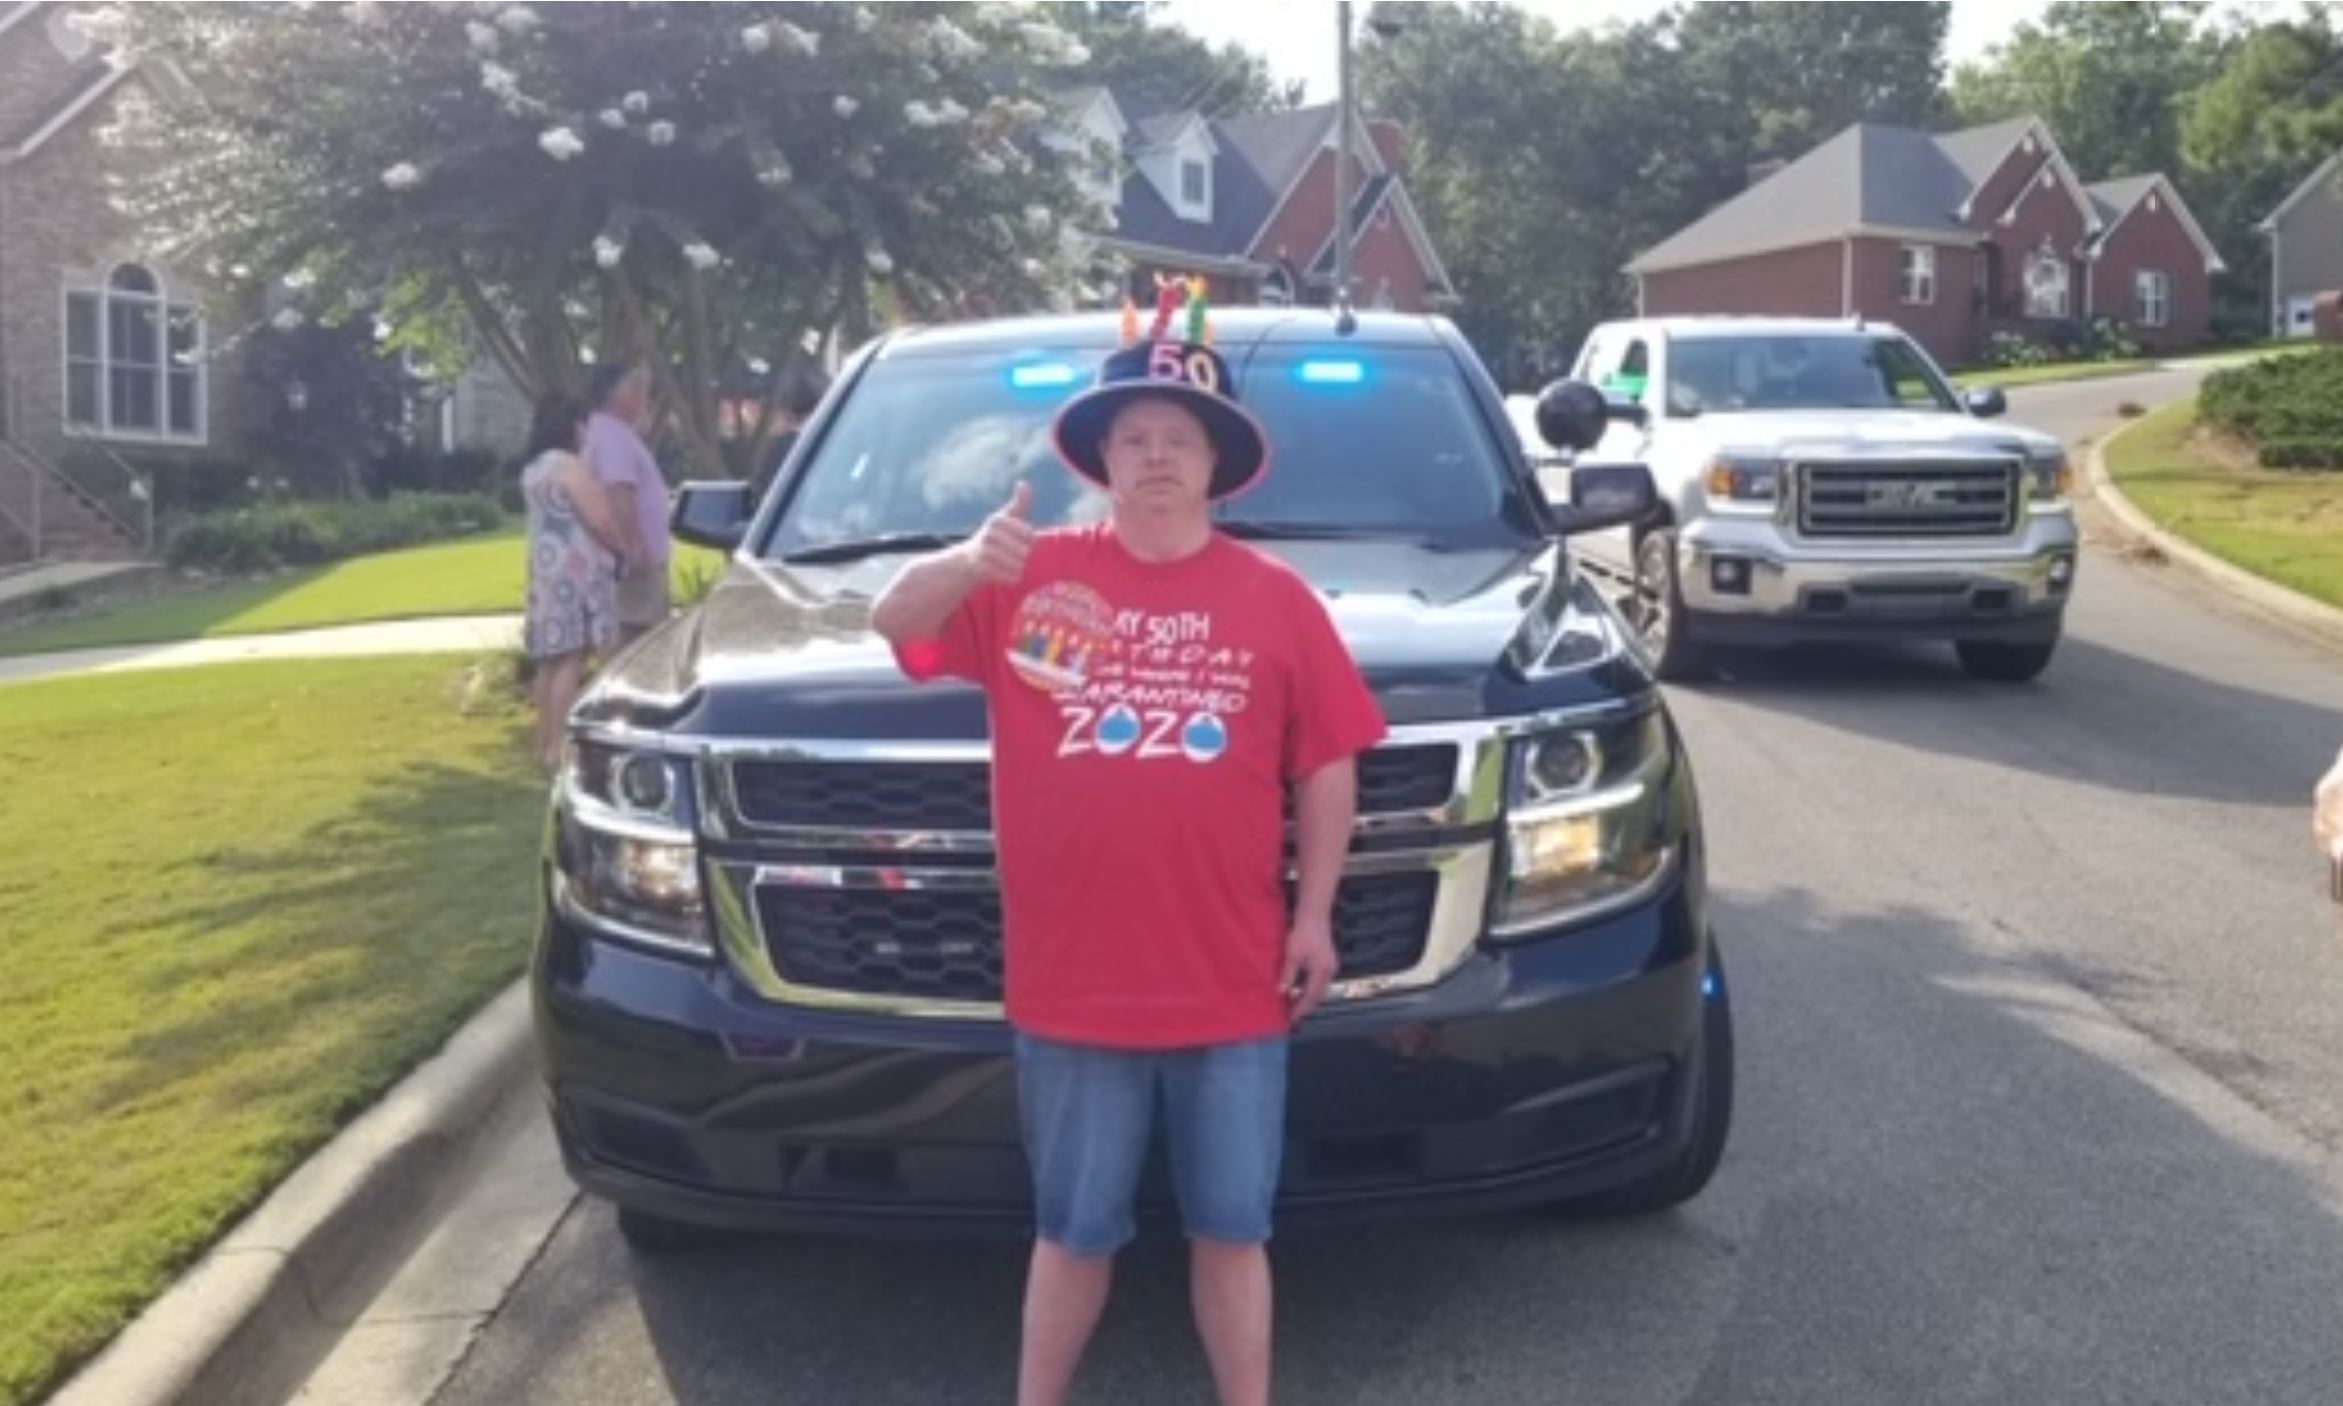 Community celebrates Trussville man with Down Syndrome with 50th birthday drive-by party